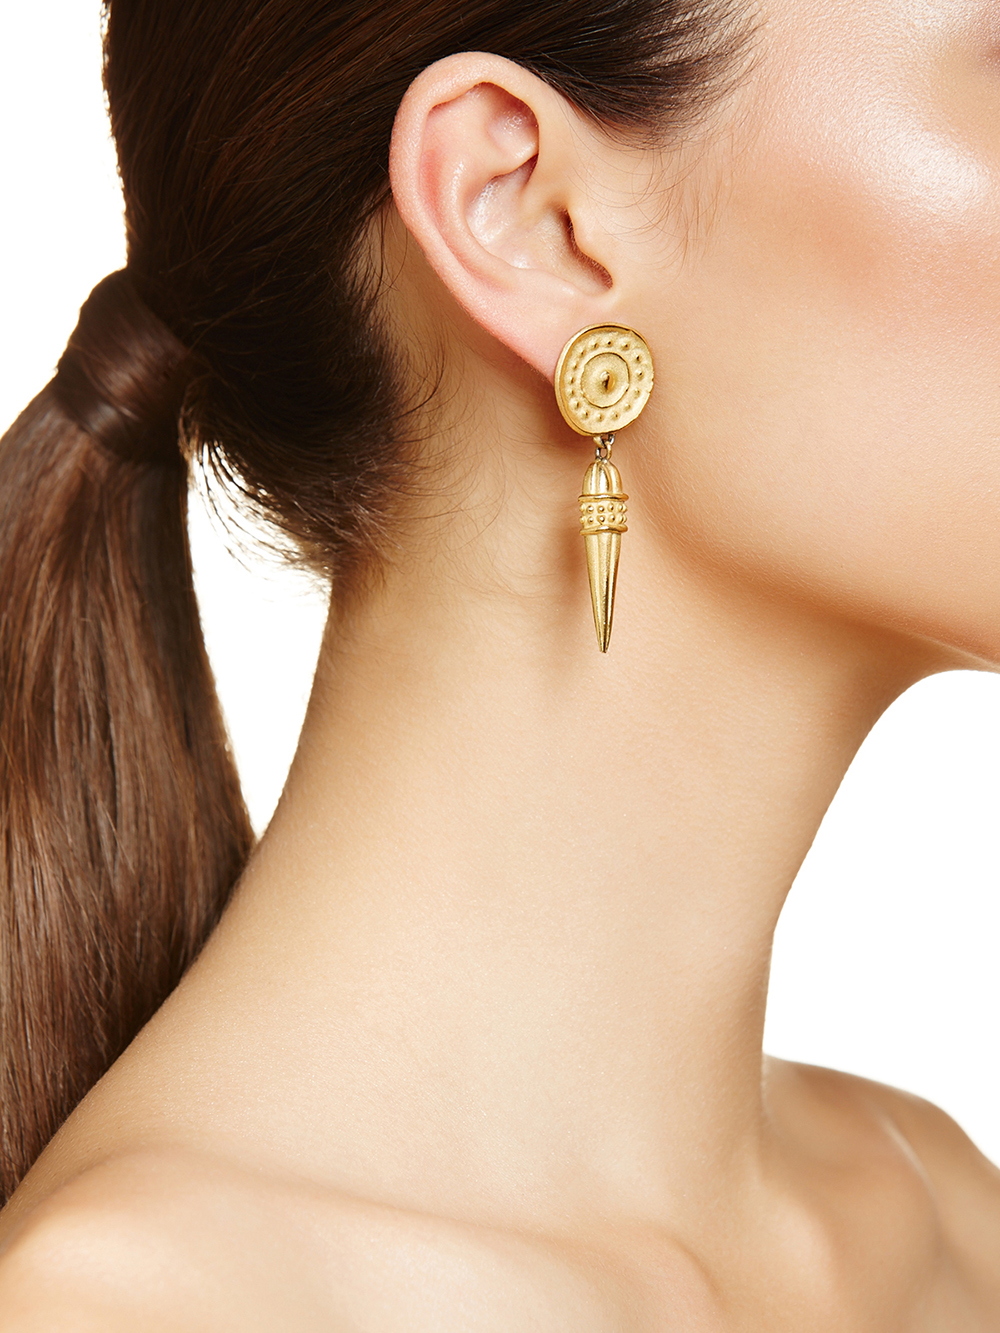 Givenchy Namibia earrings, $329